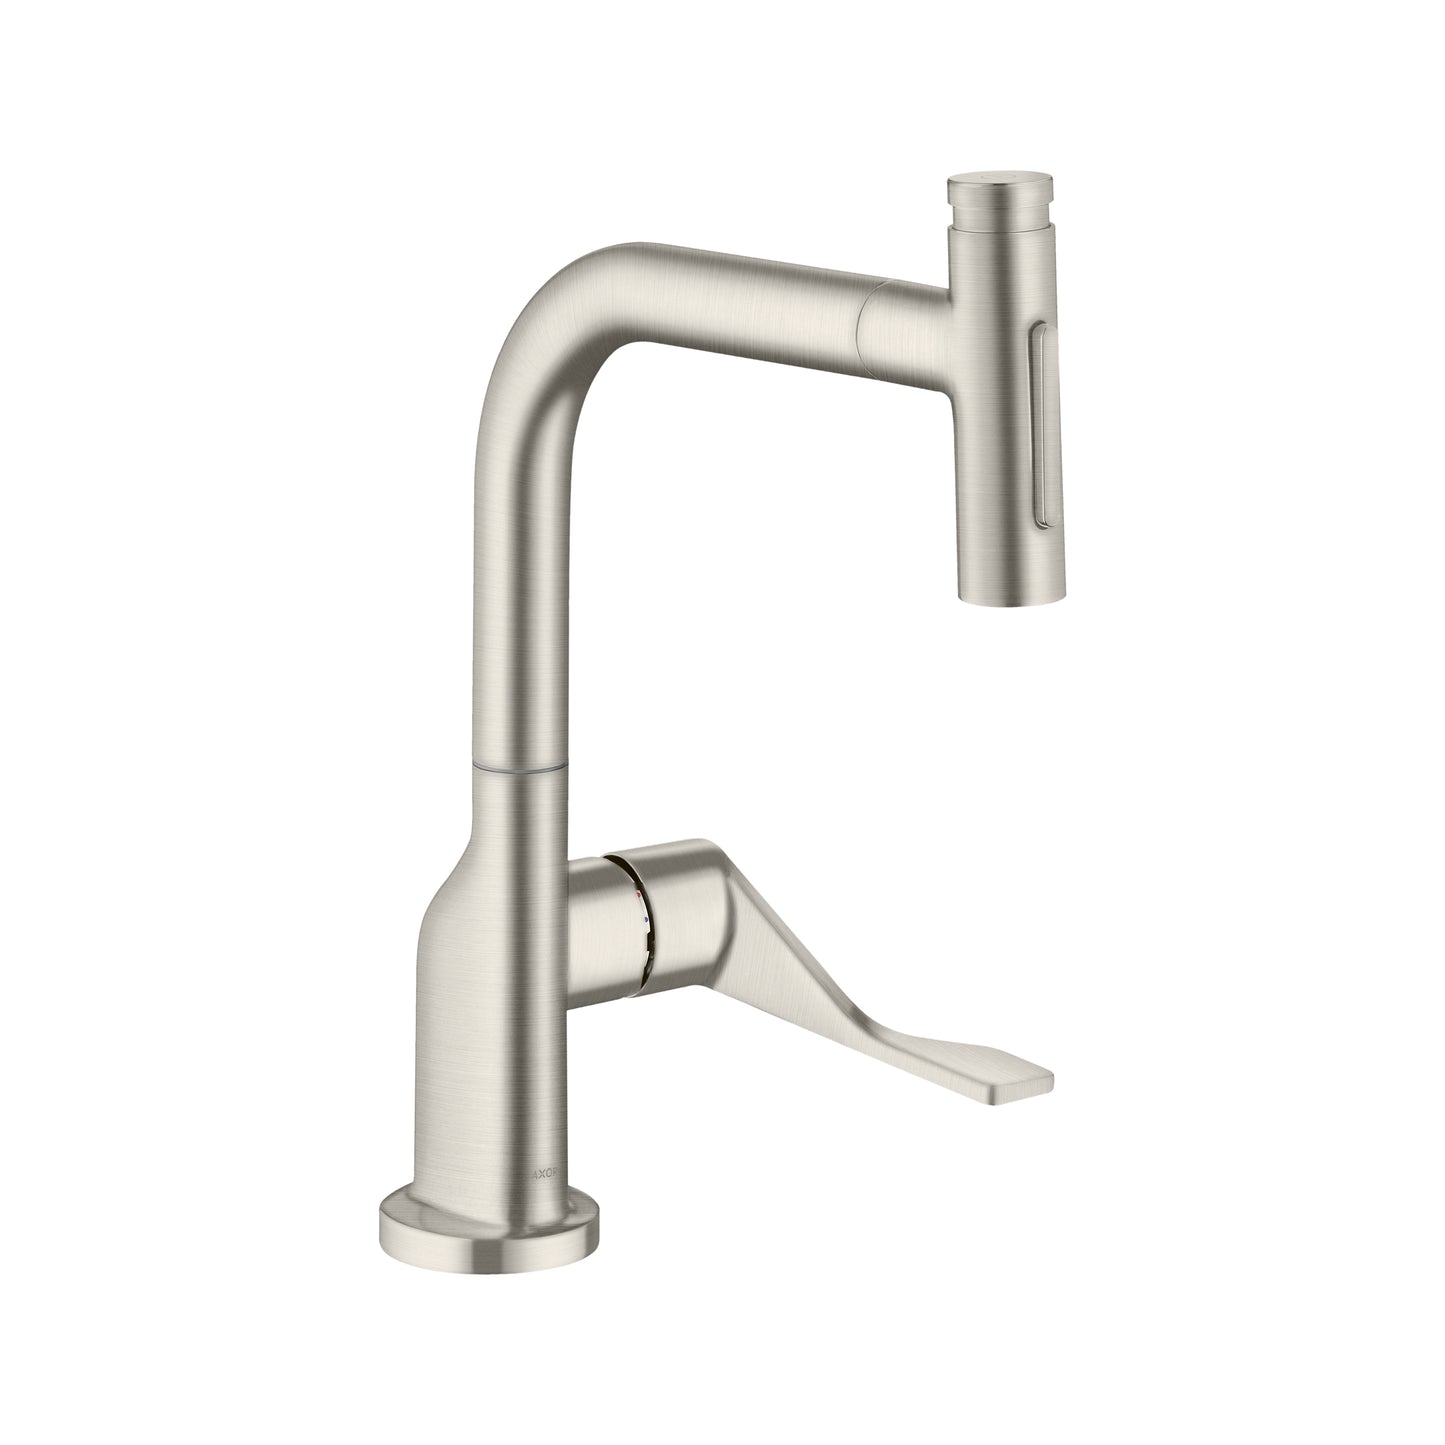 AXOR 39862801 Stainless Steel Optic Citterio Modern Kitchen Faucet 1.75 GPM